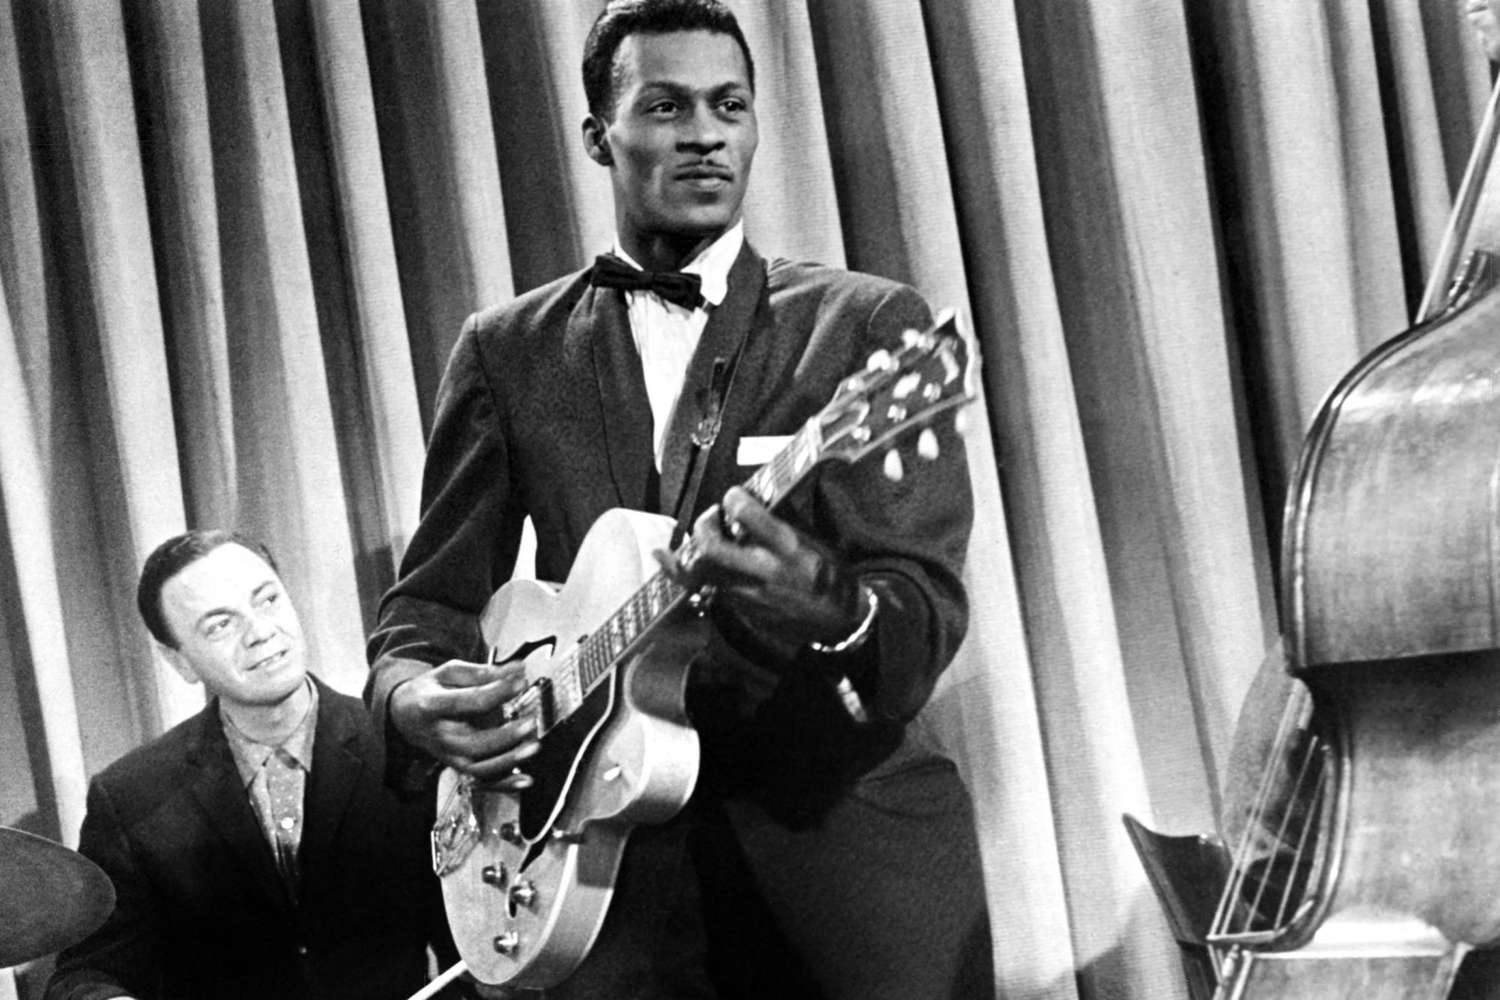 GO, JOHNNY, GO!, Chuck Berry, Alan Freed (on drums), 1958